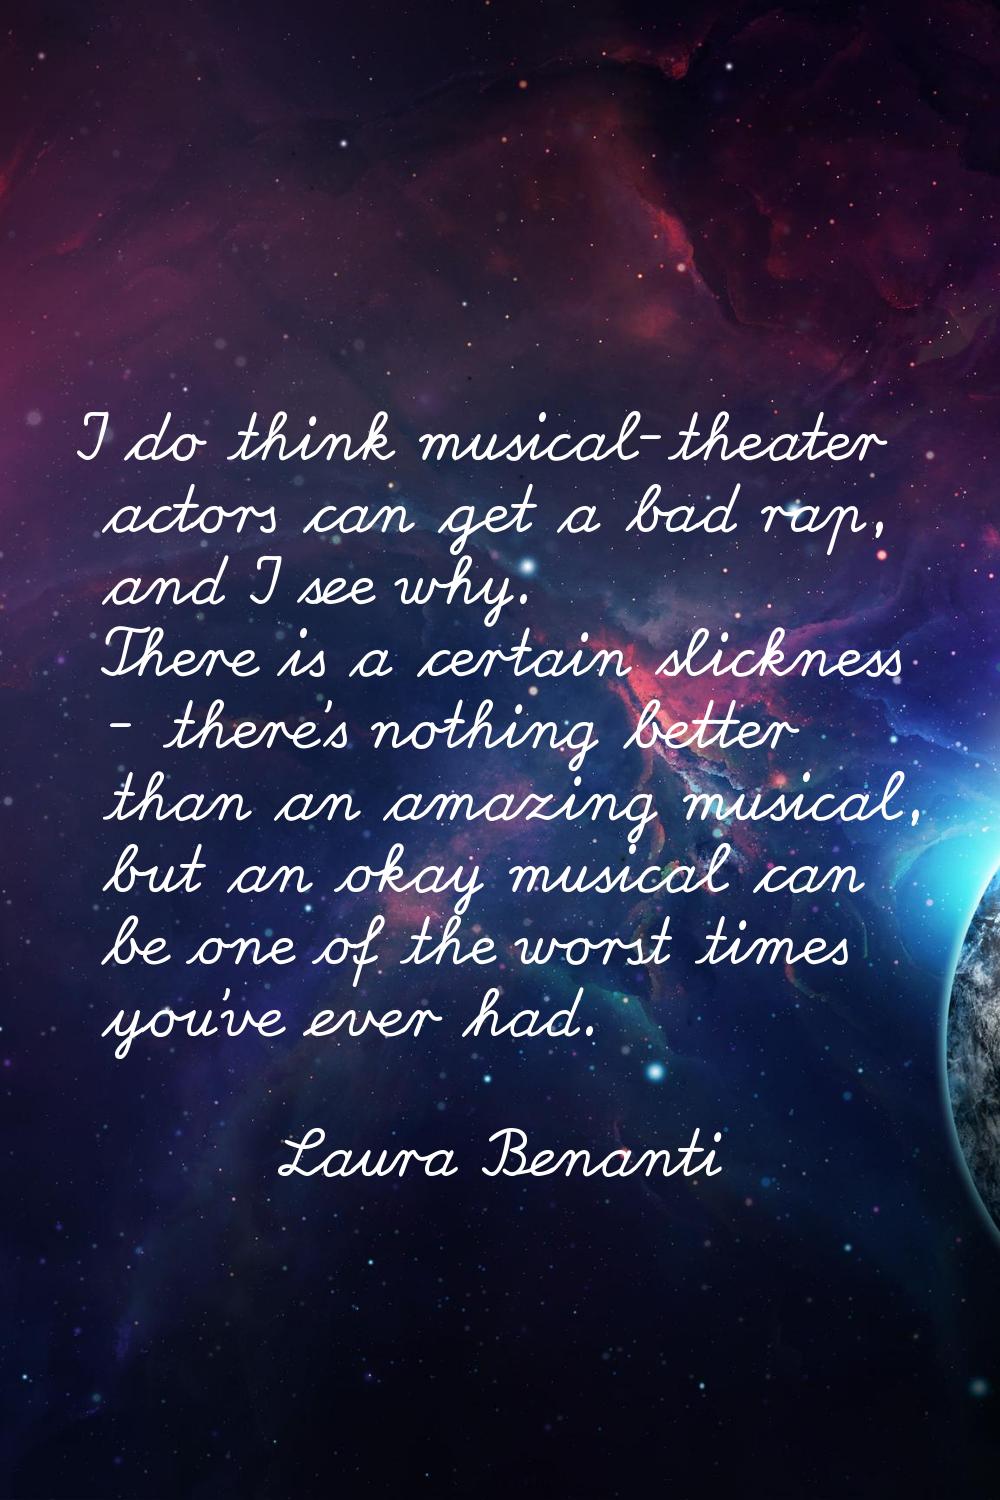 I do think musical-theater actors can get a bad rap, and I see why. There is a certain slickness - 